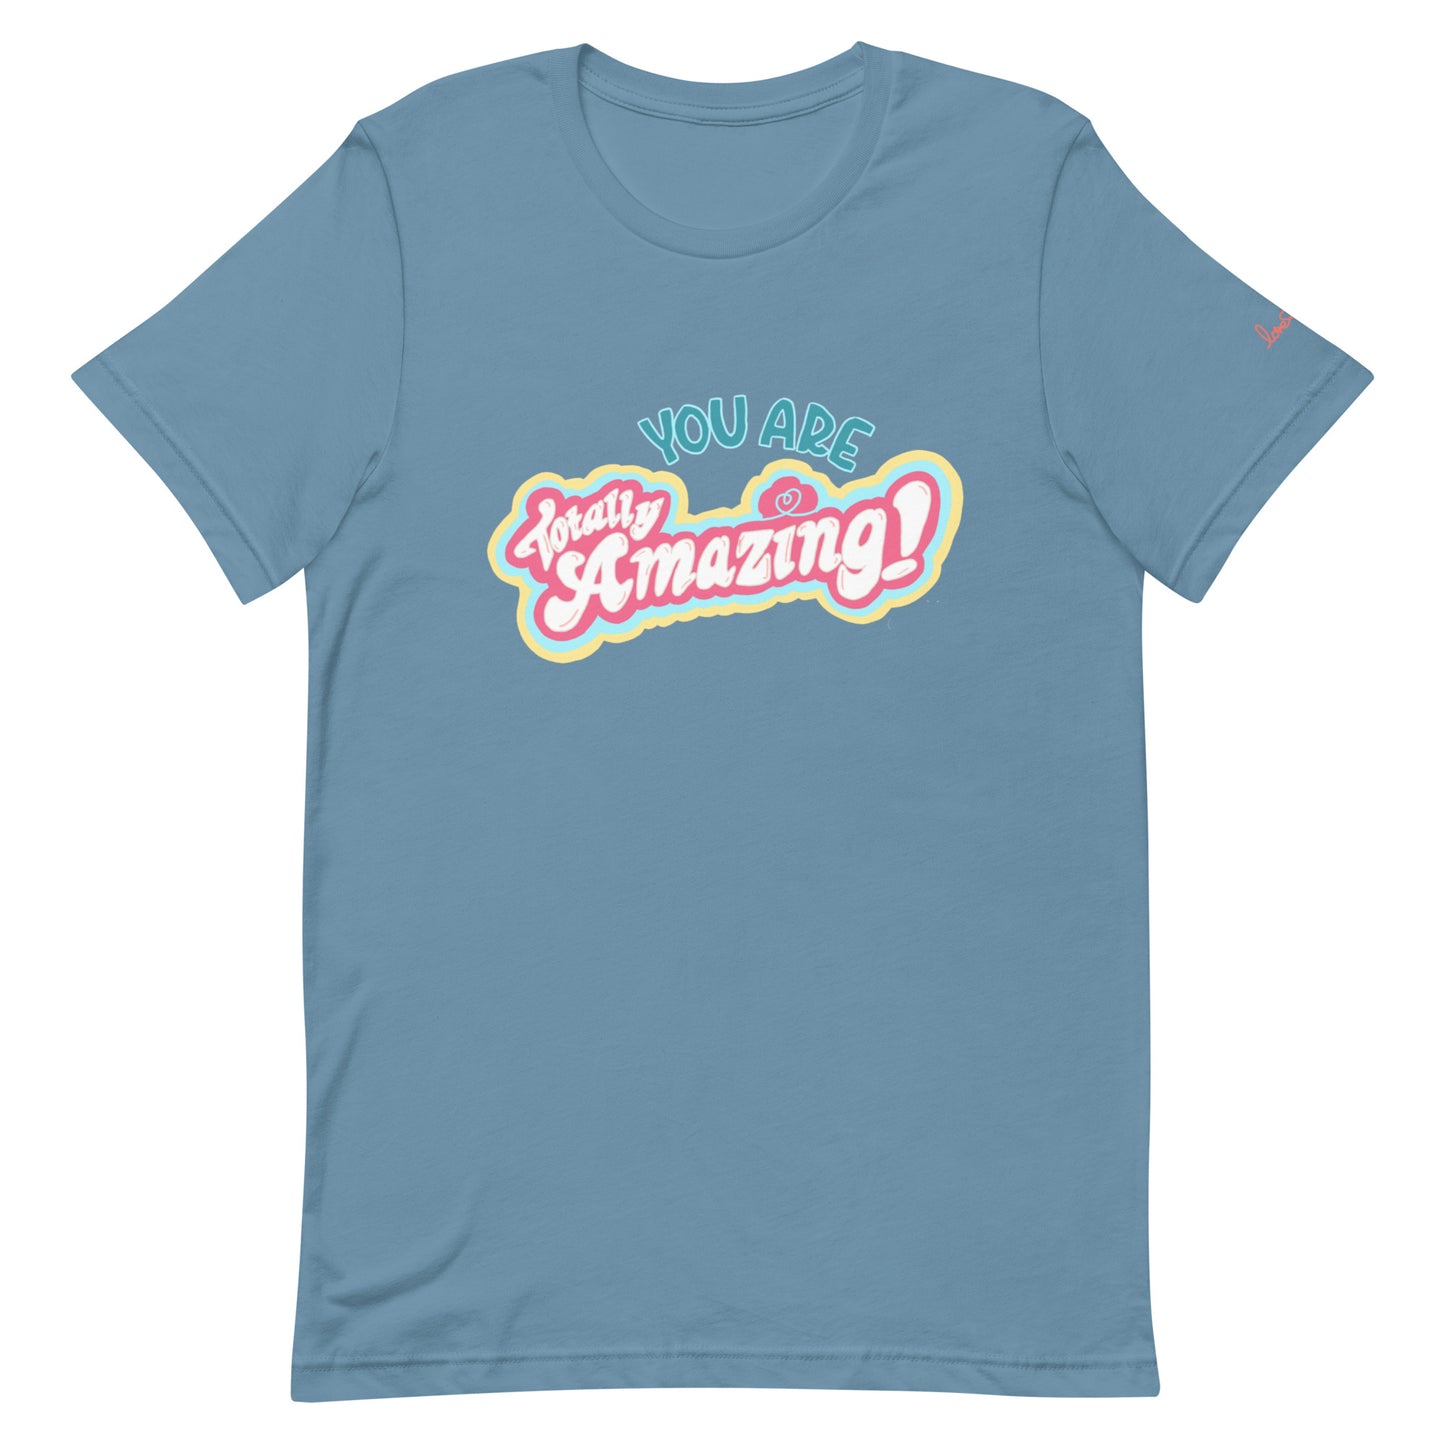 You are totally amazing t-shirt